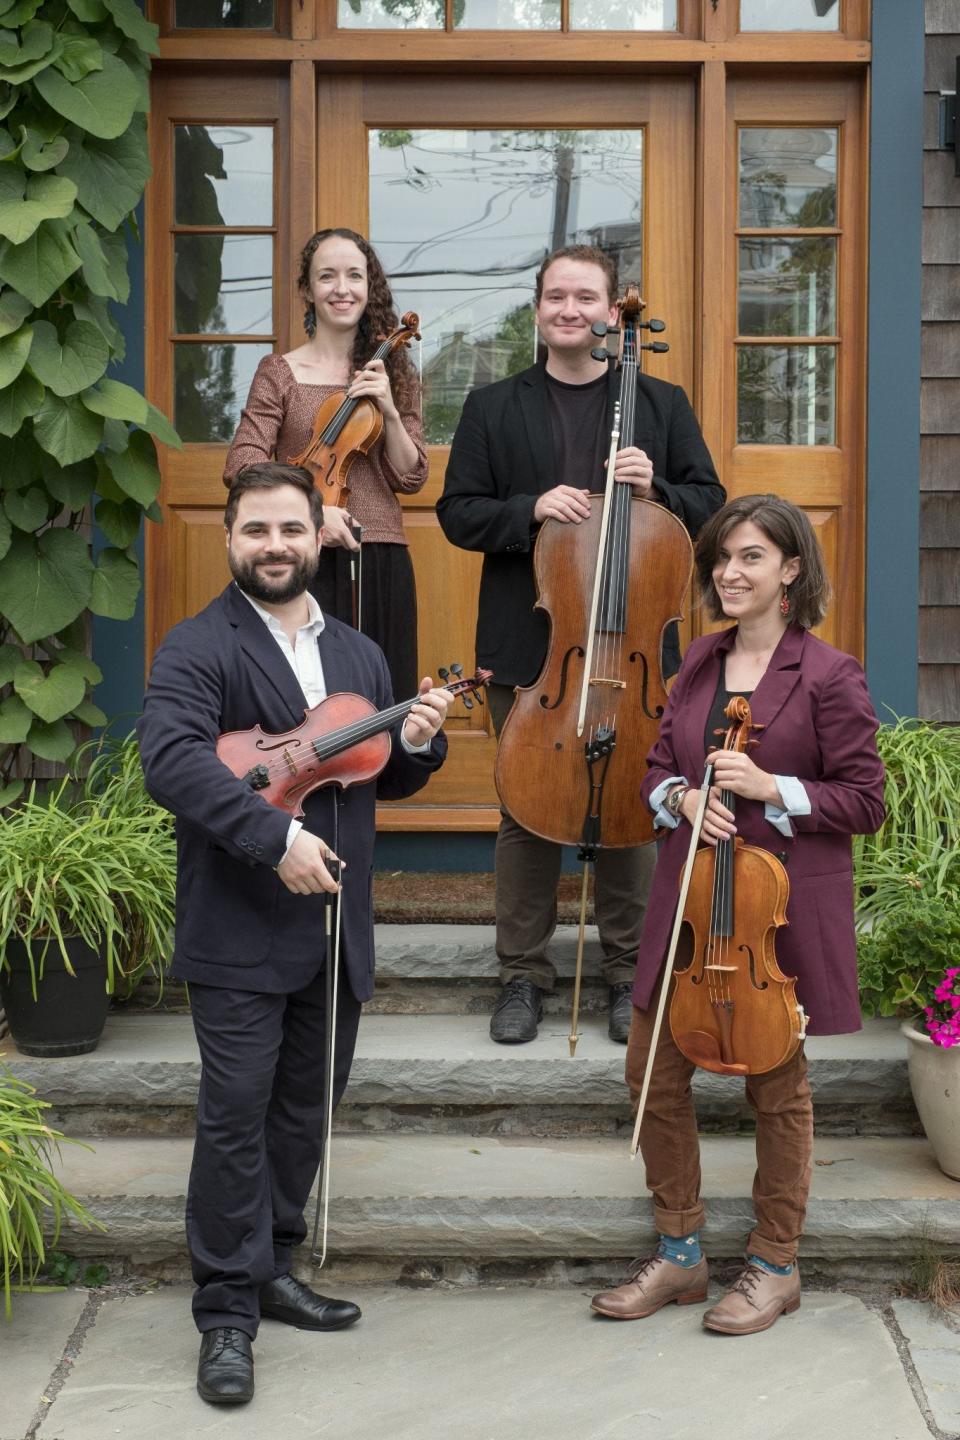 The Newport String Quartet will perform at the Jamestown Arts Center on Sunday.